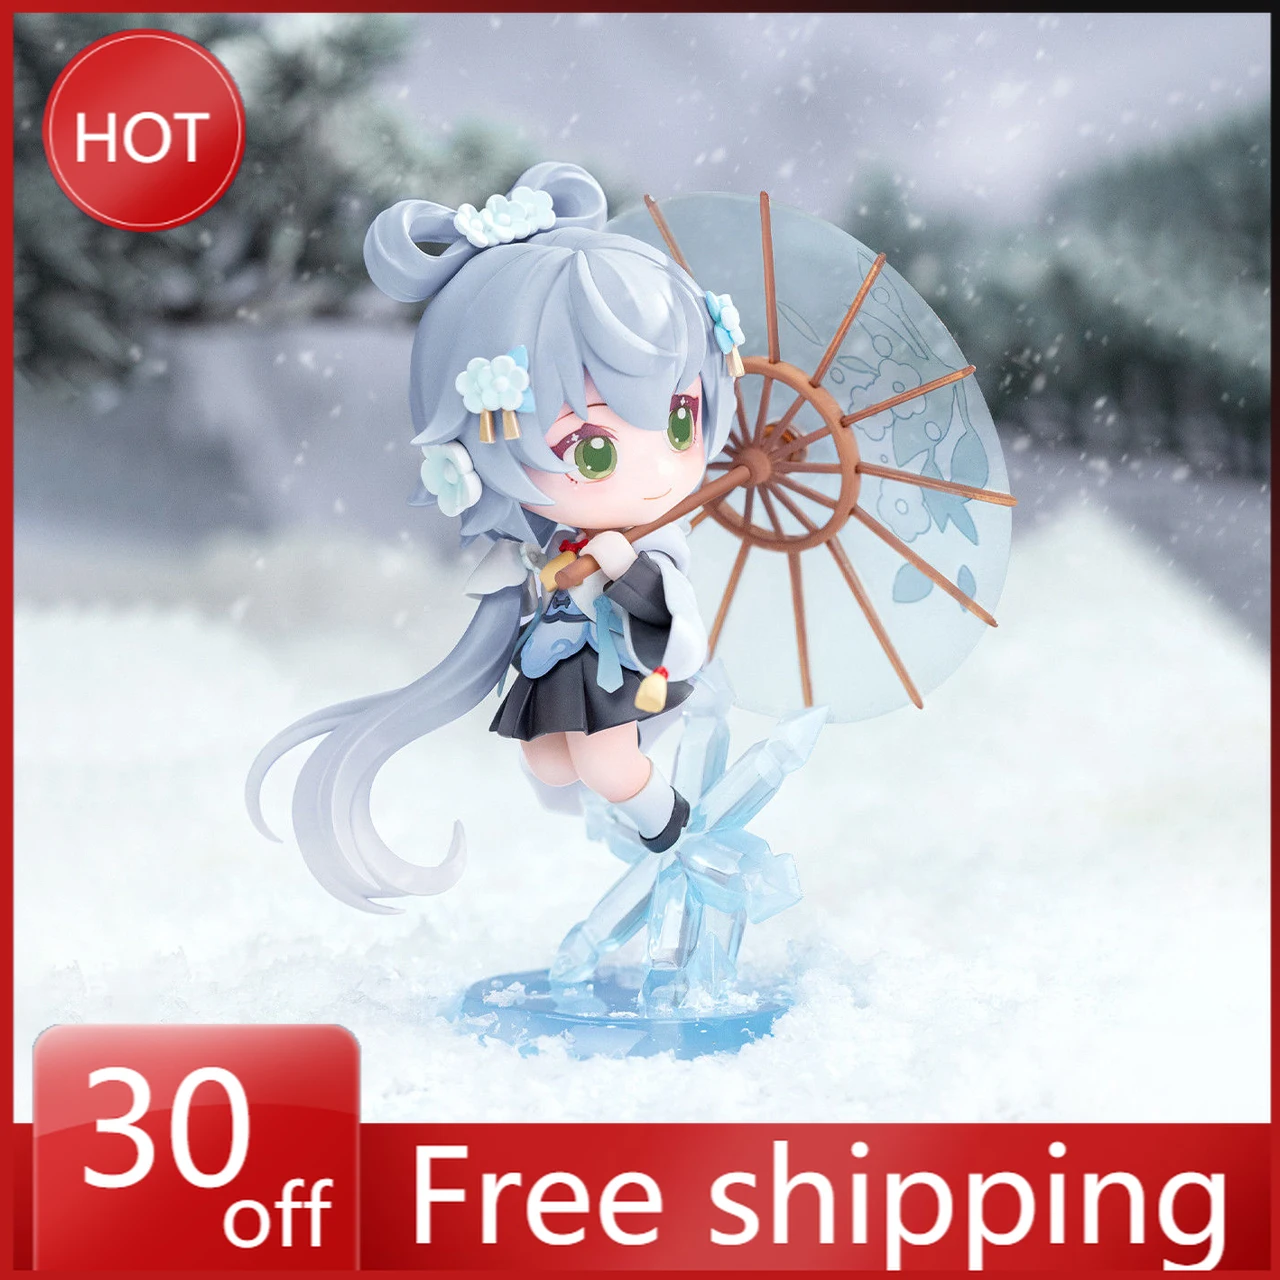 

12cm Luo Tianyi Figure Virtual Diva Q Version Cute Girl Series Doll Ornaments Collection Desktop Display Birthday Gift Toys Game